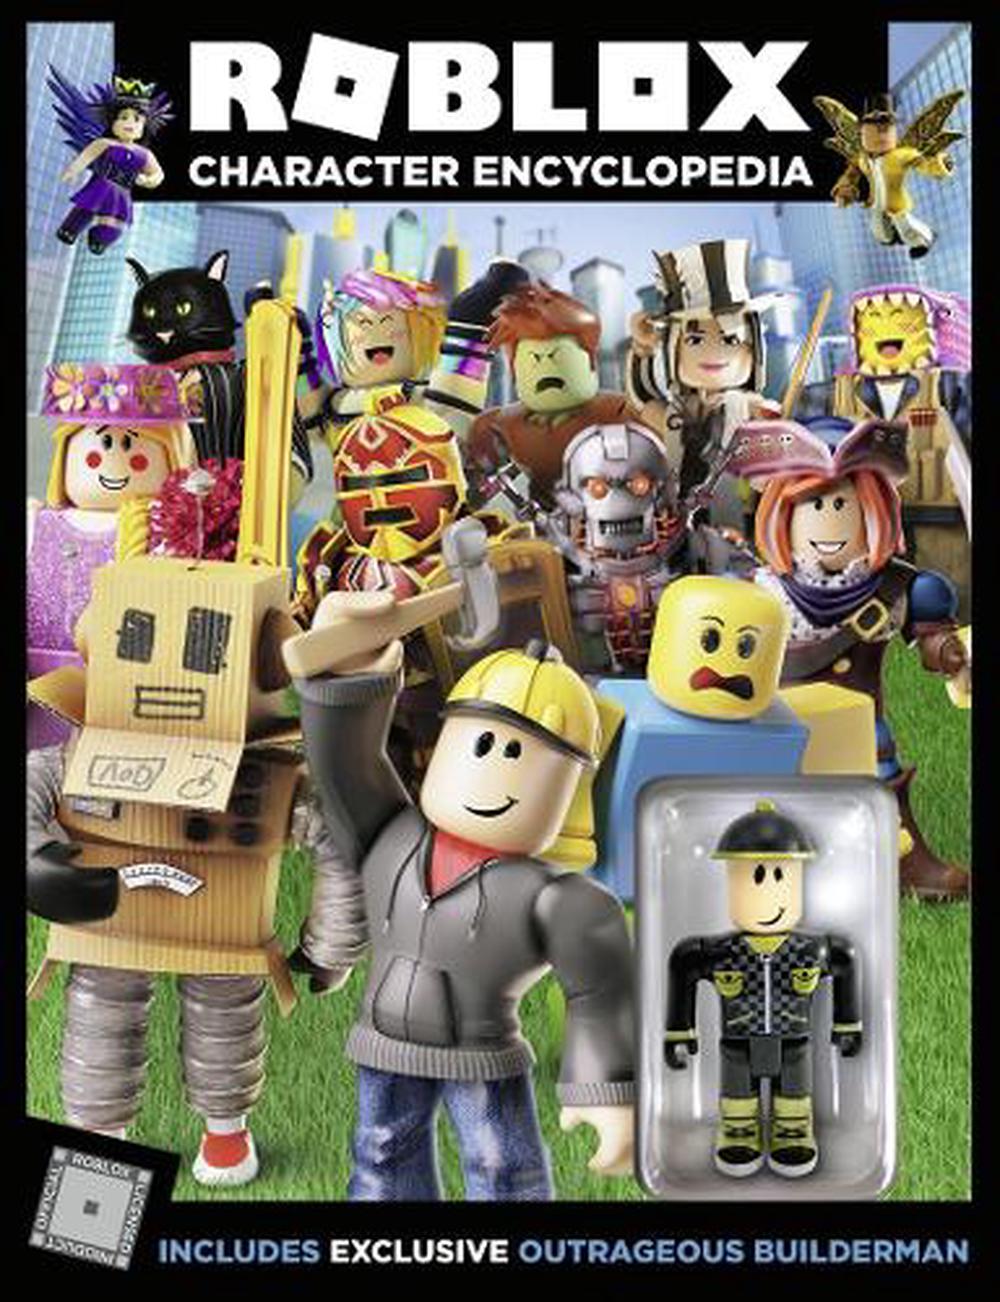 Roblox Character Encyclopedia By Egmont Publishing Uk 9781405291613 For Sale Online Ebay - roblox toys john lewis